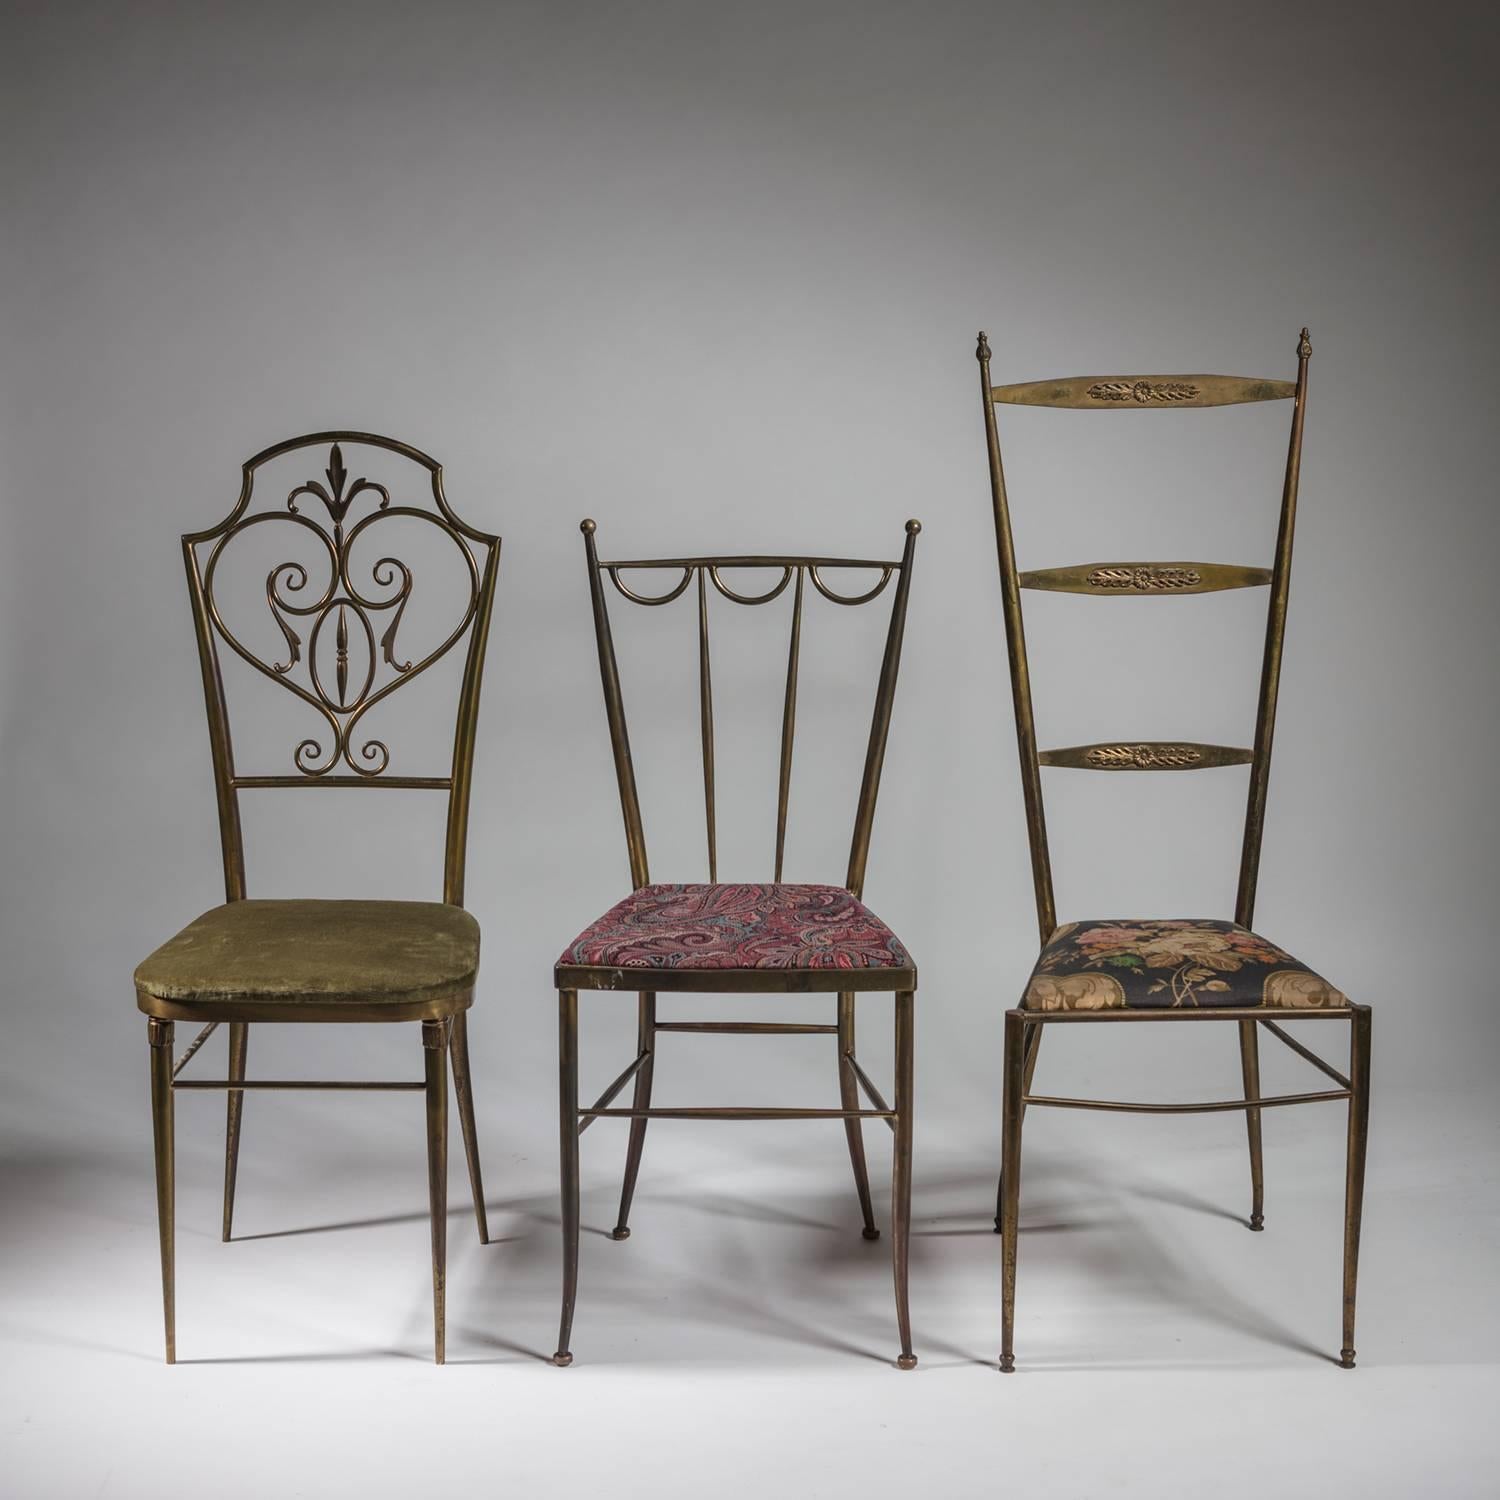 Set of six pairs of brass Chiavari chairs.
Every pair features different backrest shape and upholstery.
Size refers to the tallest pair.